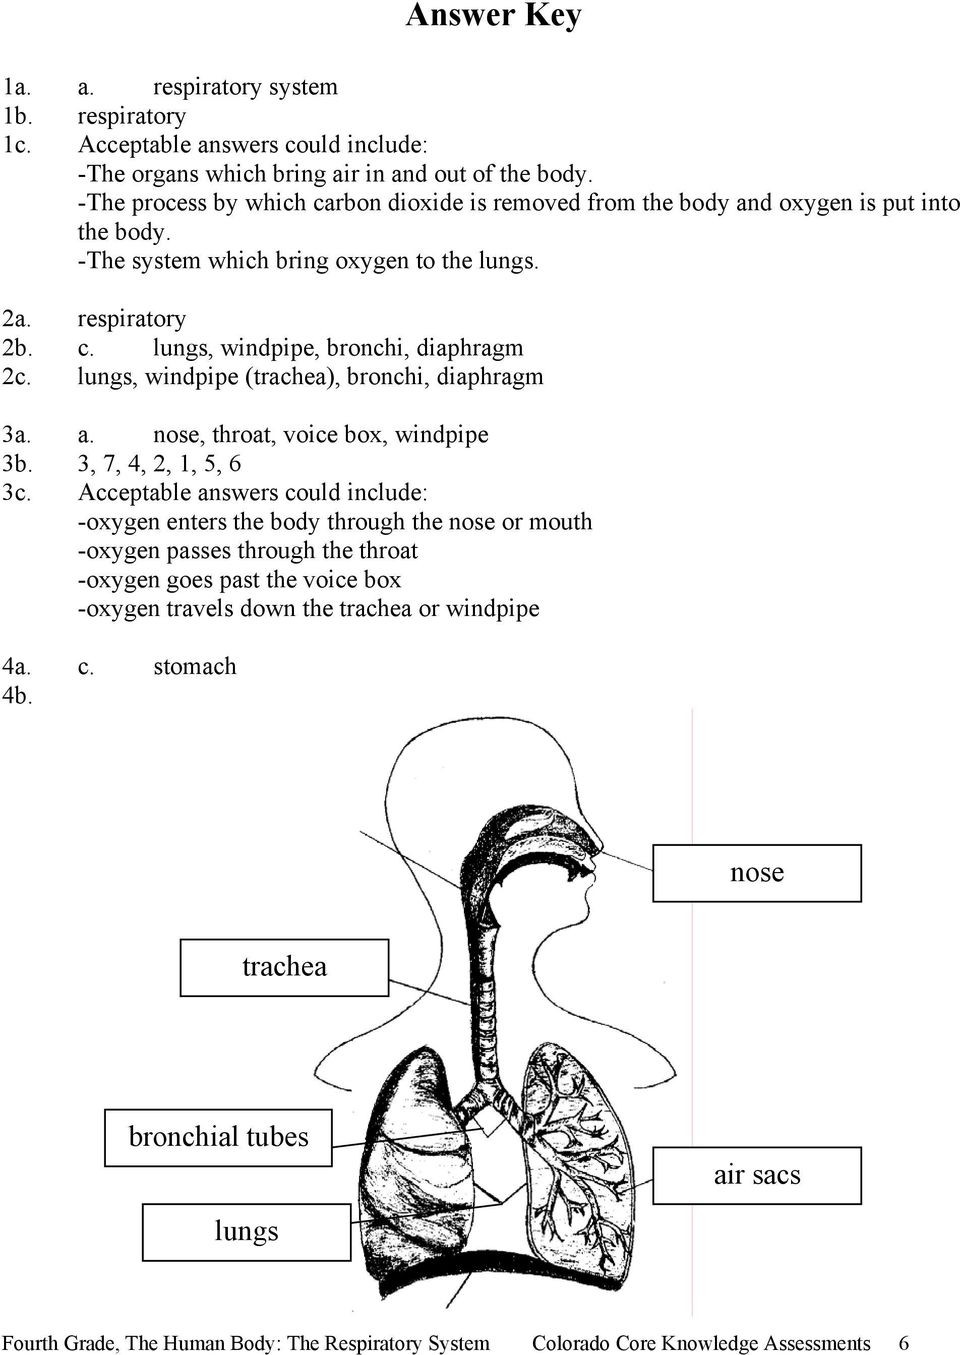 Respiratory System Worksheet Pdf Fourth Grade the Human Body the Respiratory System